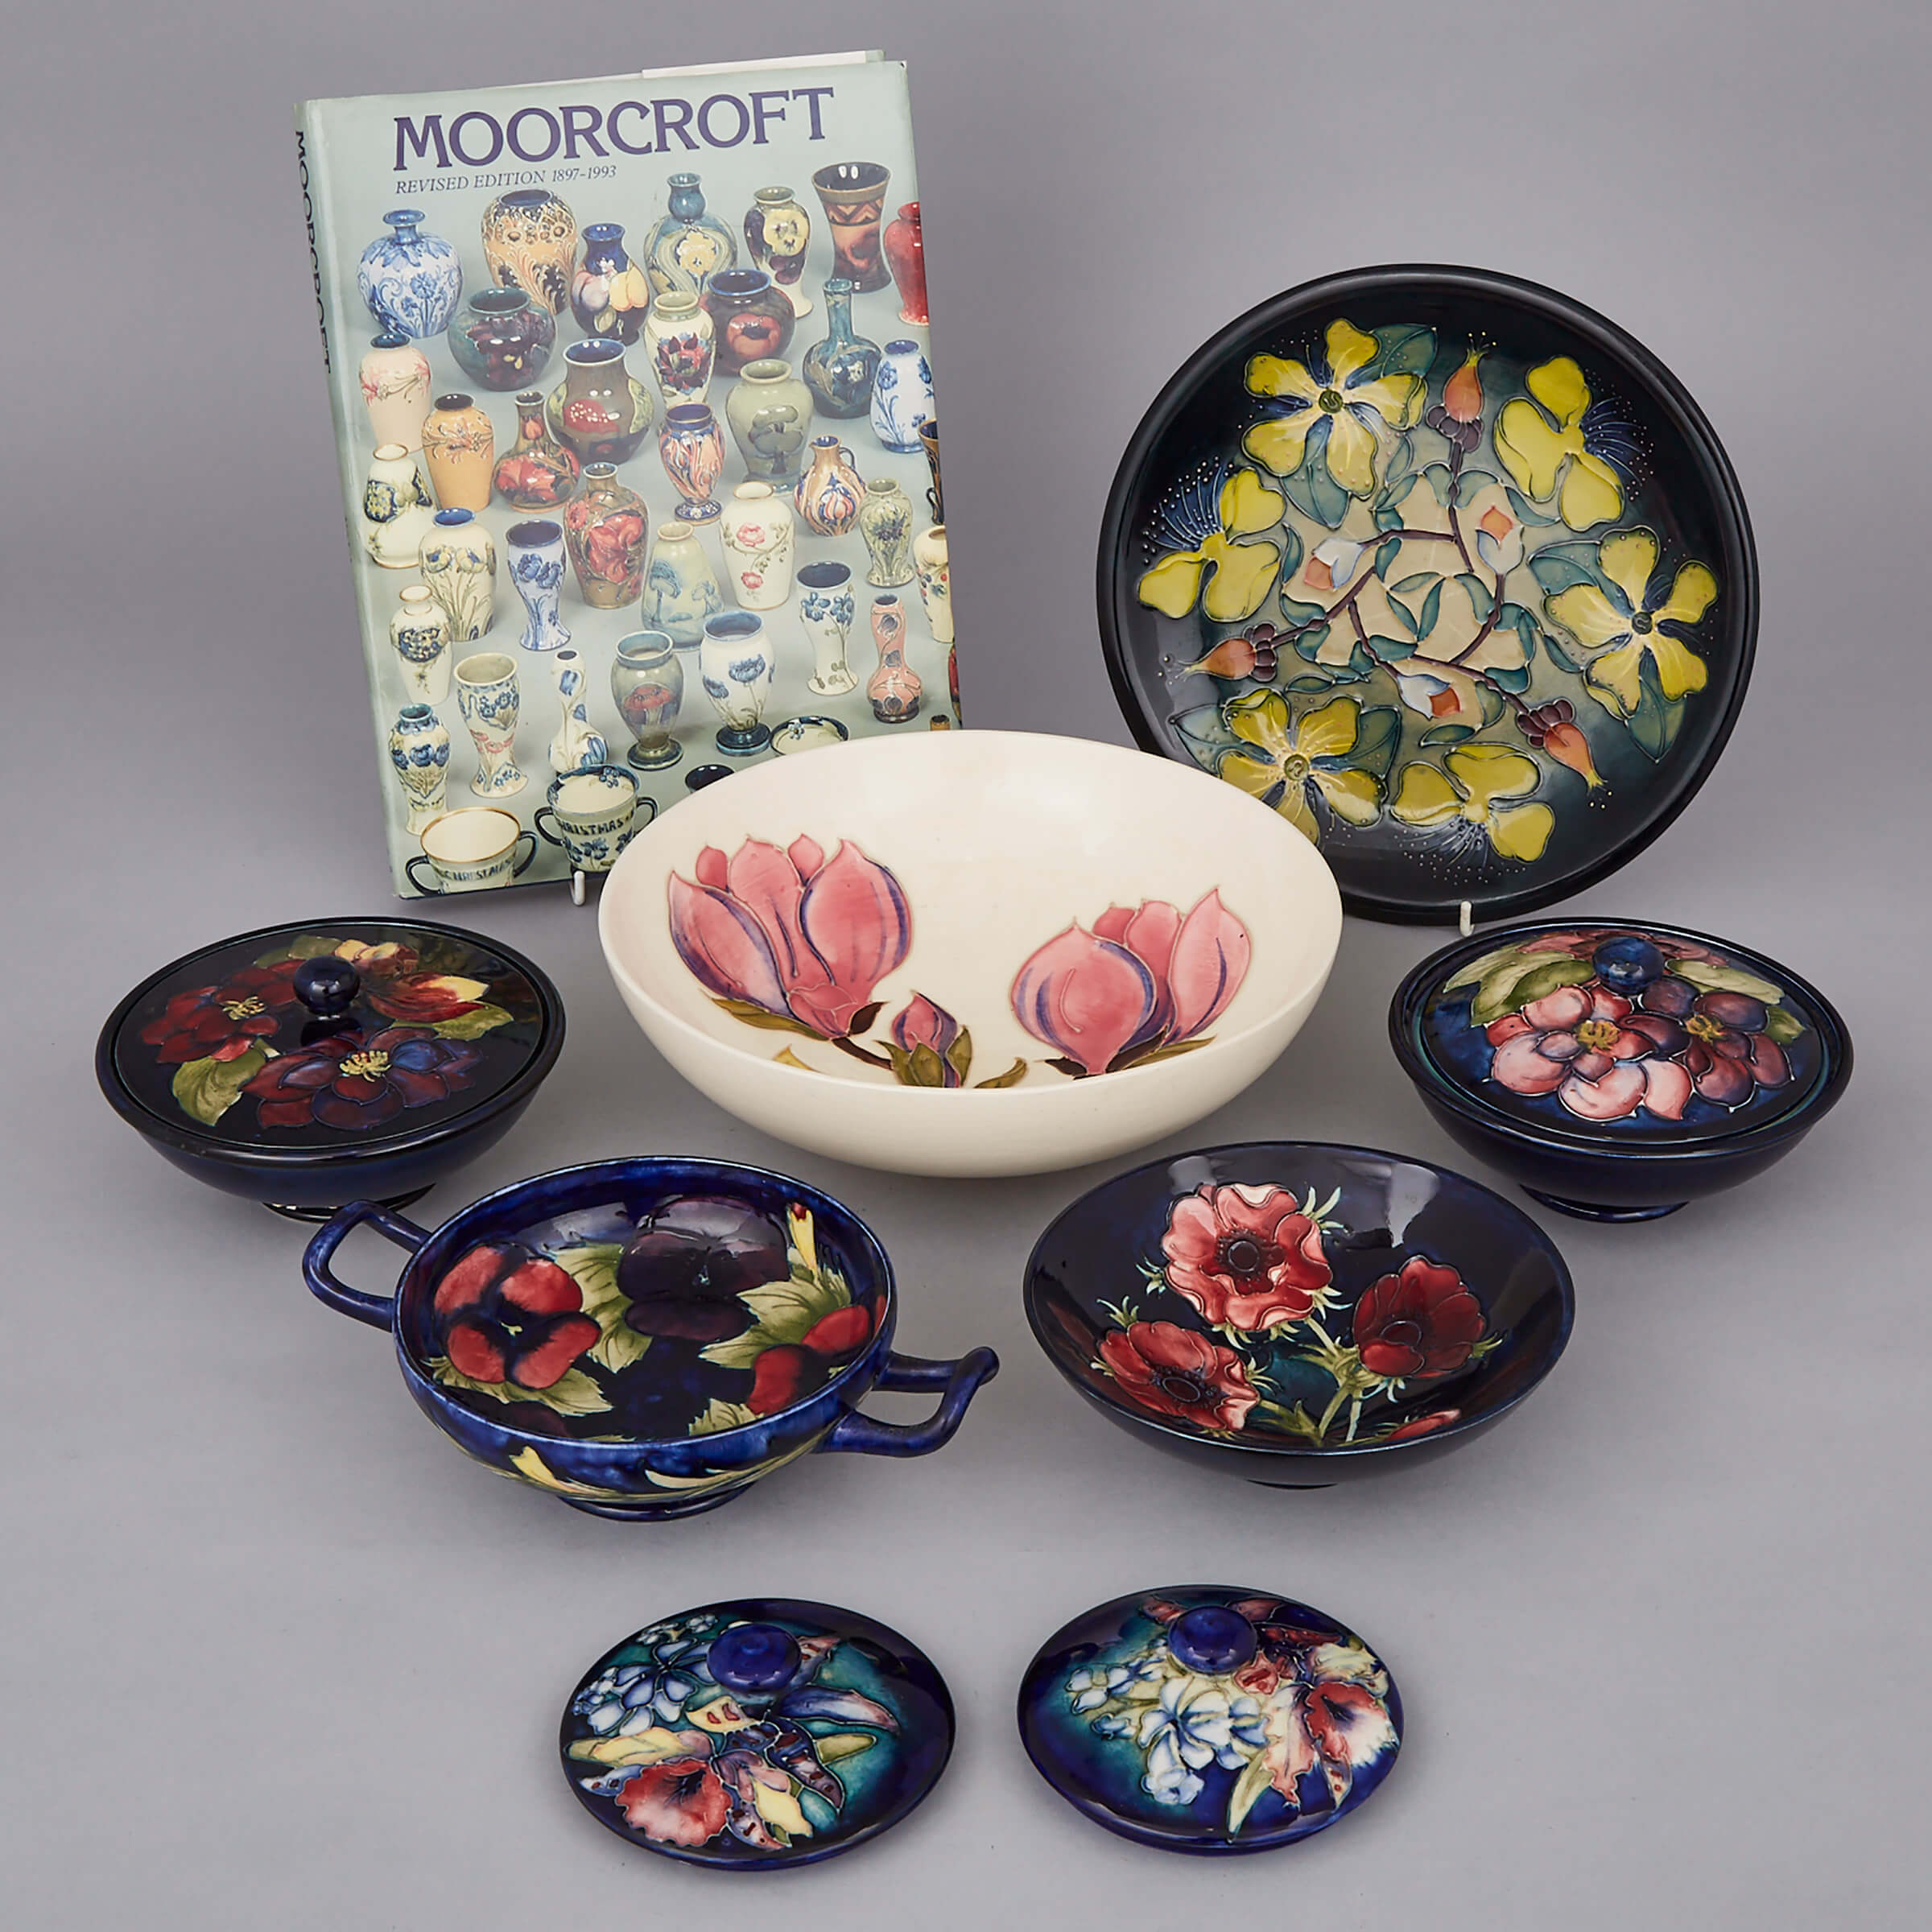 Group of Moorcroft Pottery and a Monograph, 20th century